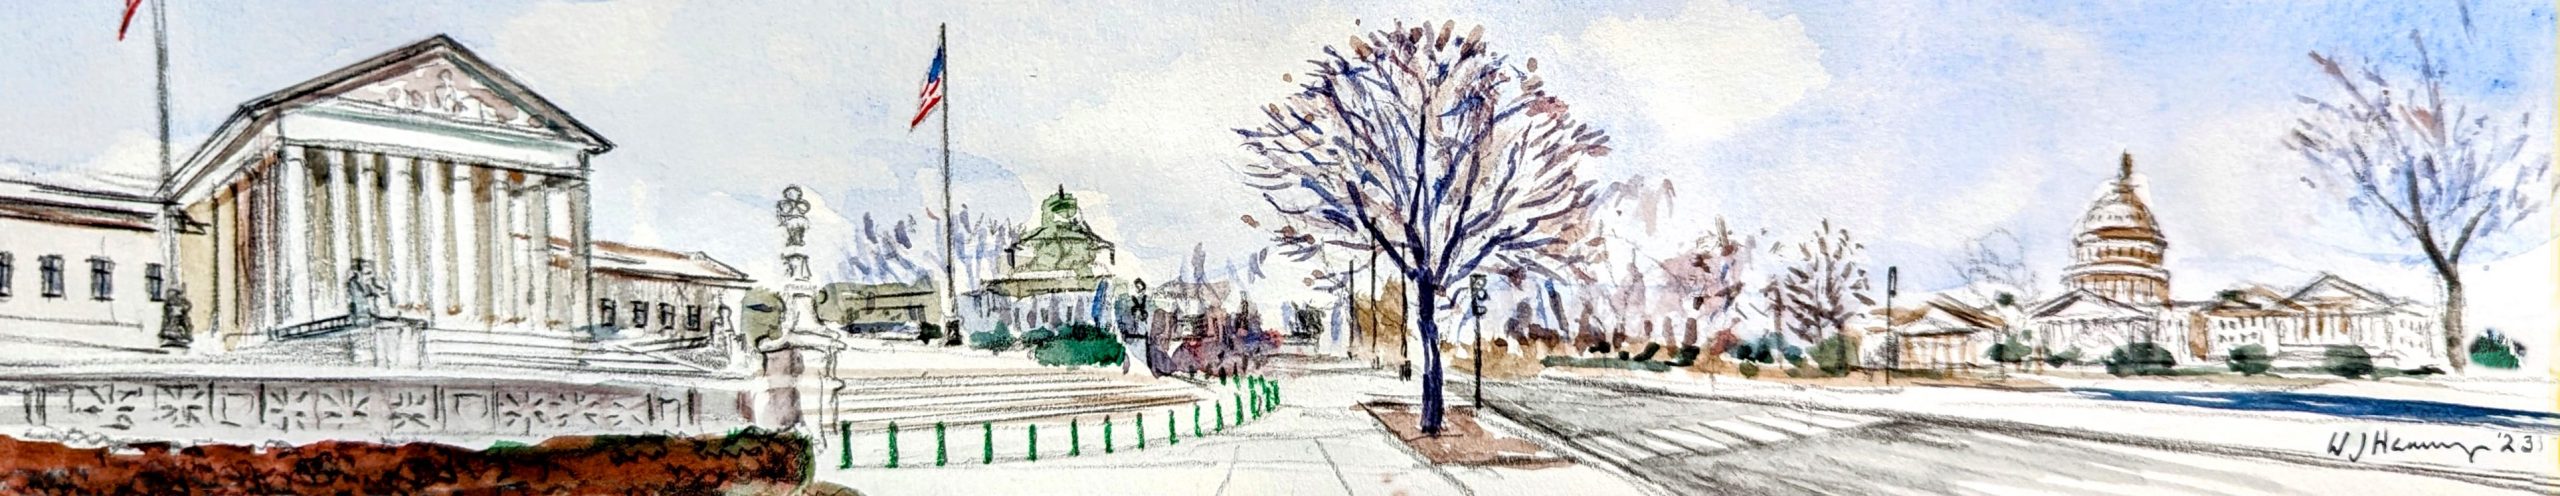 artist's sketch of a panoramic view showing Supreme Court building on left, a colorful tree in the center of the image, and the Capitol building in the distance on the right